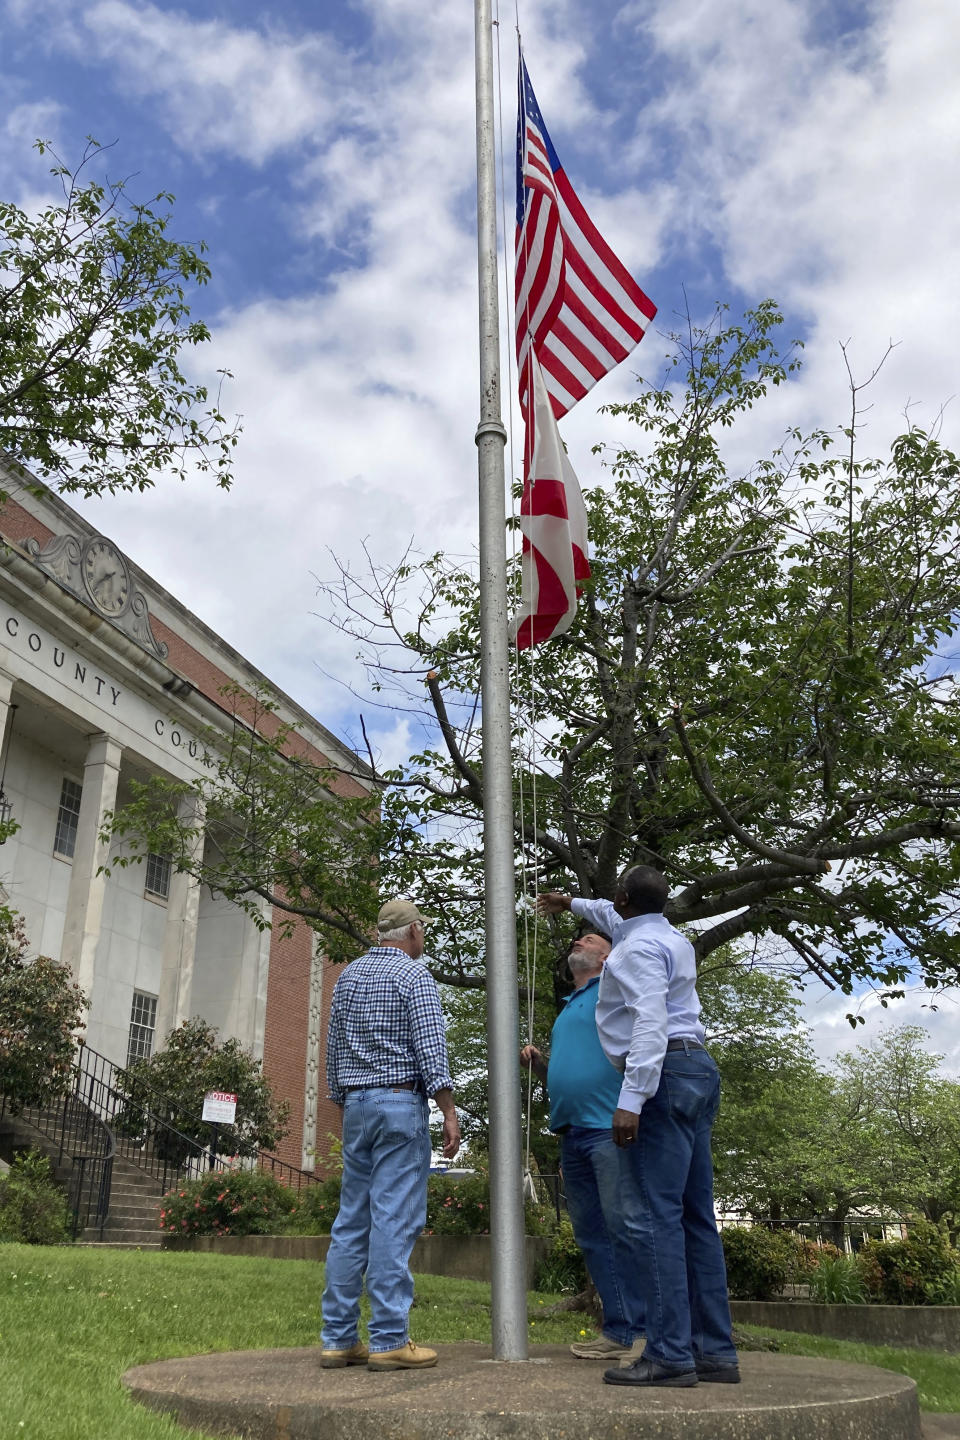 Men lower the U.S. and Alabama flag to half-staff at the Tallapoosa County Courthouse in Dadeville, Ala., on Sunday, April 16, 2023, hours after a fatal shooting less than a block away. Several were killed during a shooting at a birthday party Saturday night, the Alabama Law Enforcement Agency said. (AP Photo/Jeff Amy)